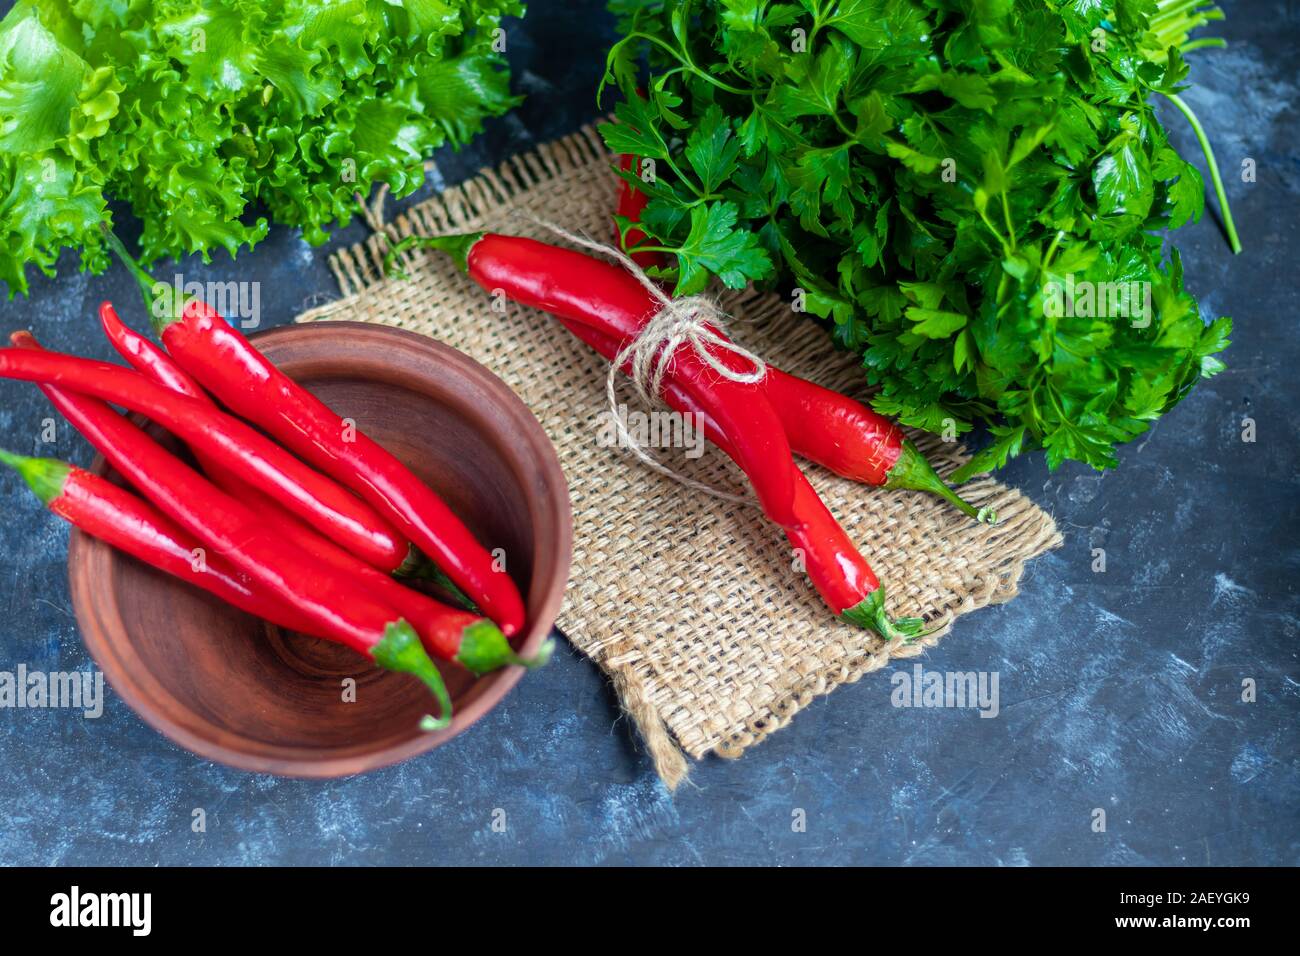 Hot red chili peppers on a dark background under concrete. Spicy food supplement. Parsley and lettuce leaves. Copy space. Stock Photo